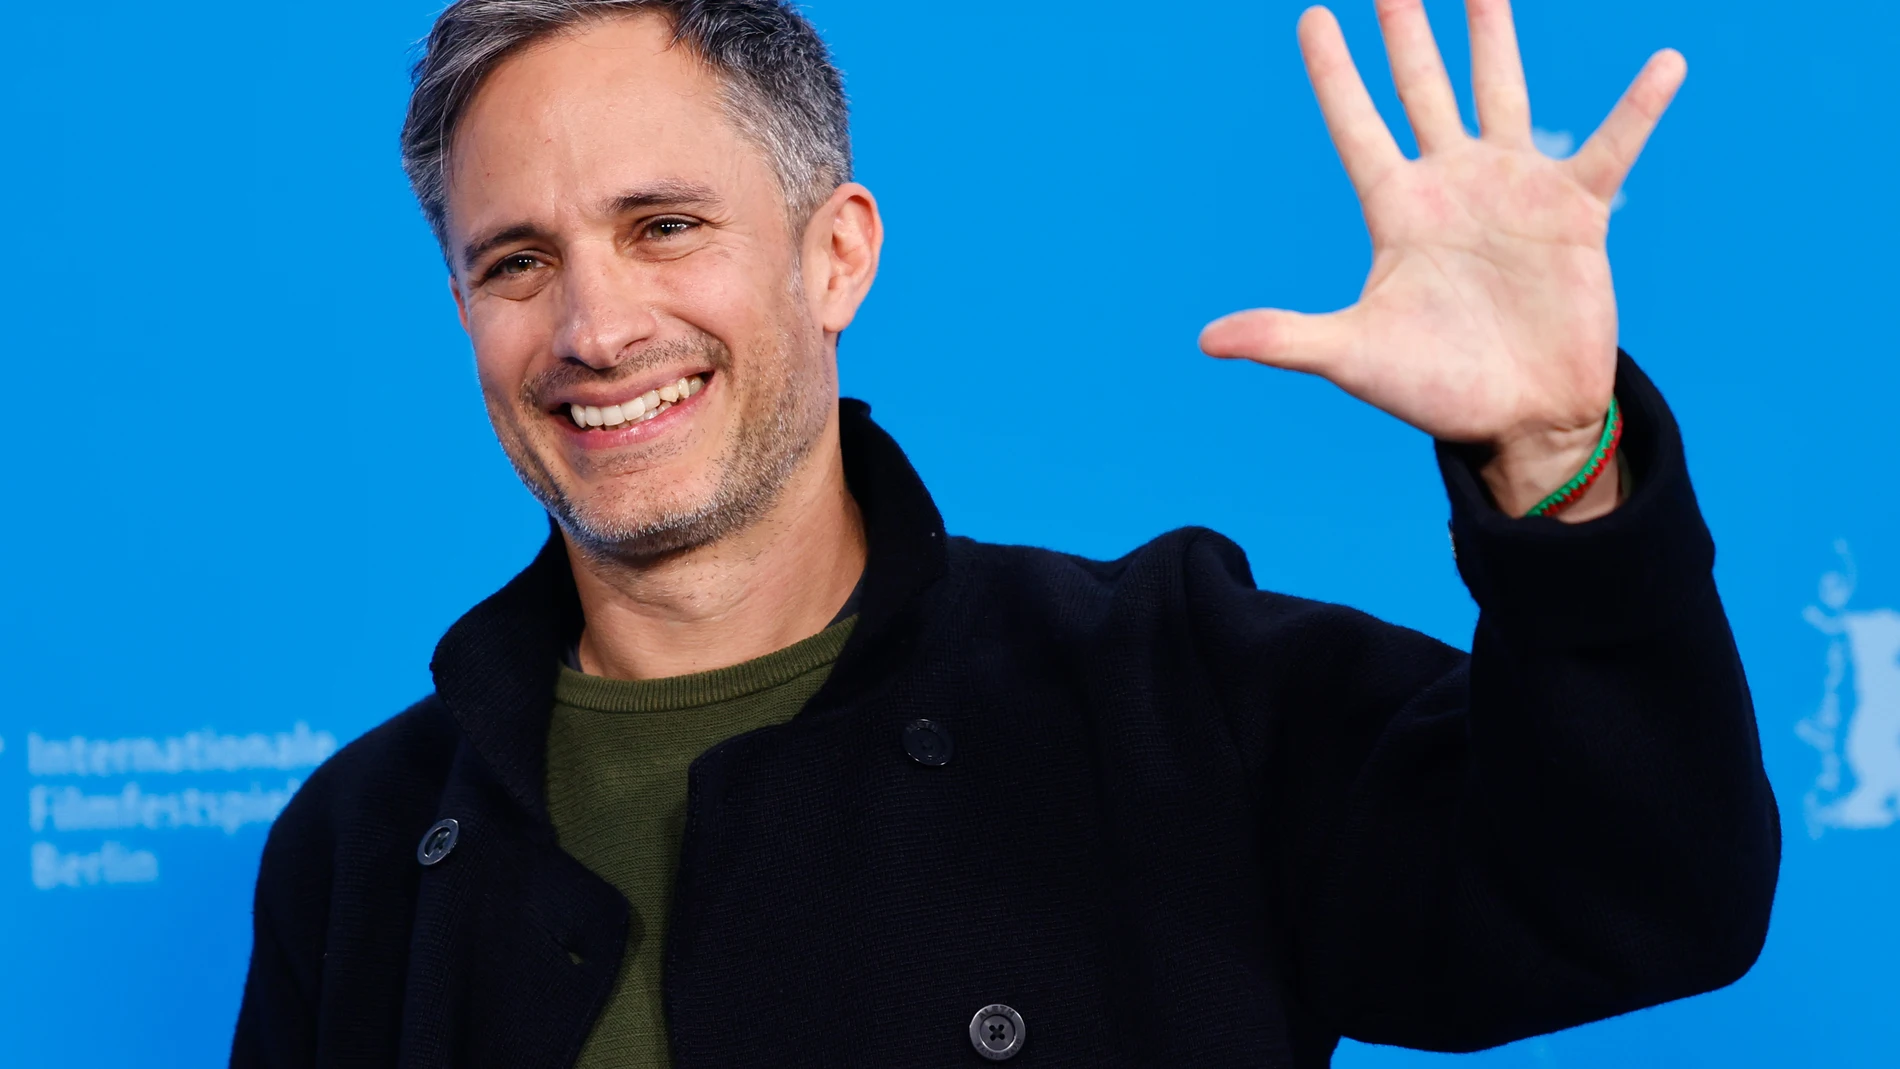 Berlin (Germany), 17/02/2024.- Mexican actor Gael Garcia Bernal waves as he attends the photocall for the movie 'Another End' during the 74th Berlin International Film Festival 'Berlinale' in Berlin, Germany, 17 February 2024. In total, 20 films will be competing for the awards in the Berlinale festival running from 15 to 25 February 2024. The awards will be presented on 24 February. (Cine, Alemania) EFE/EPA/HANNIBAL HANSCHKE 